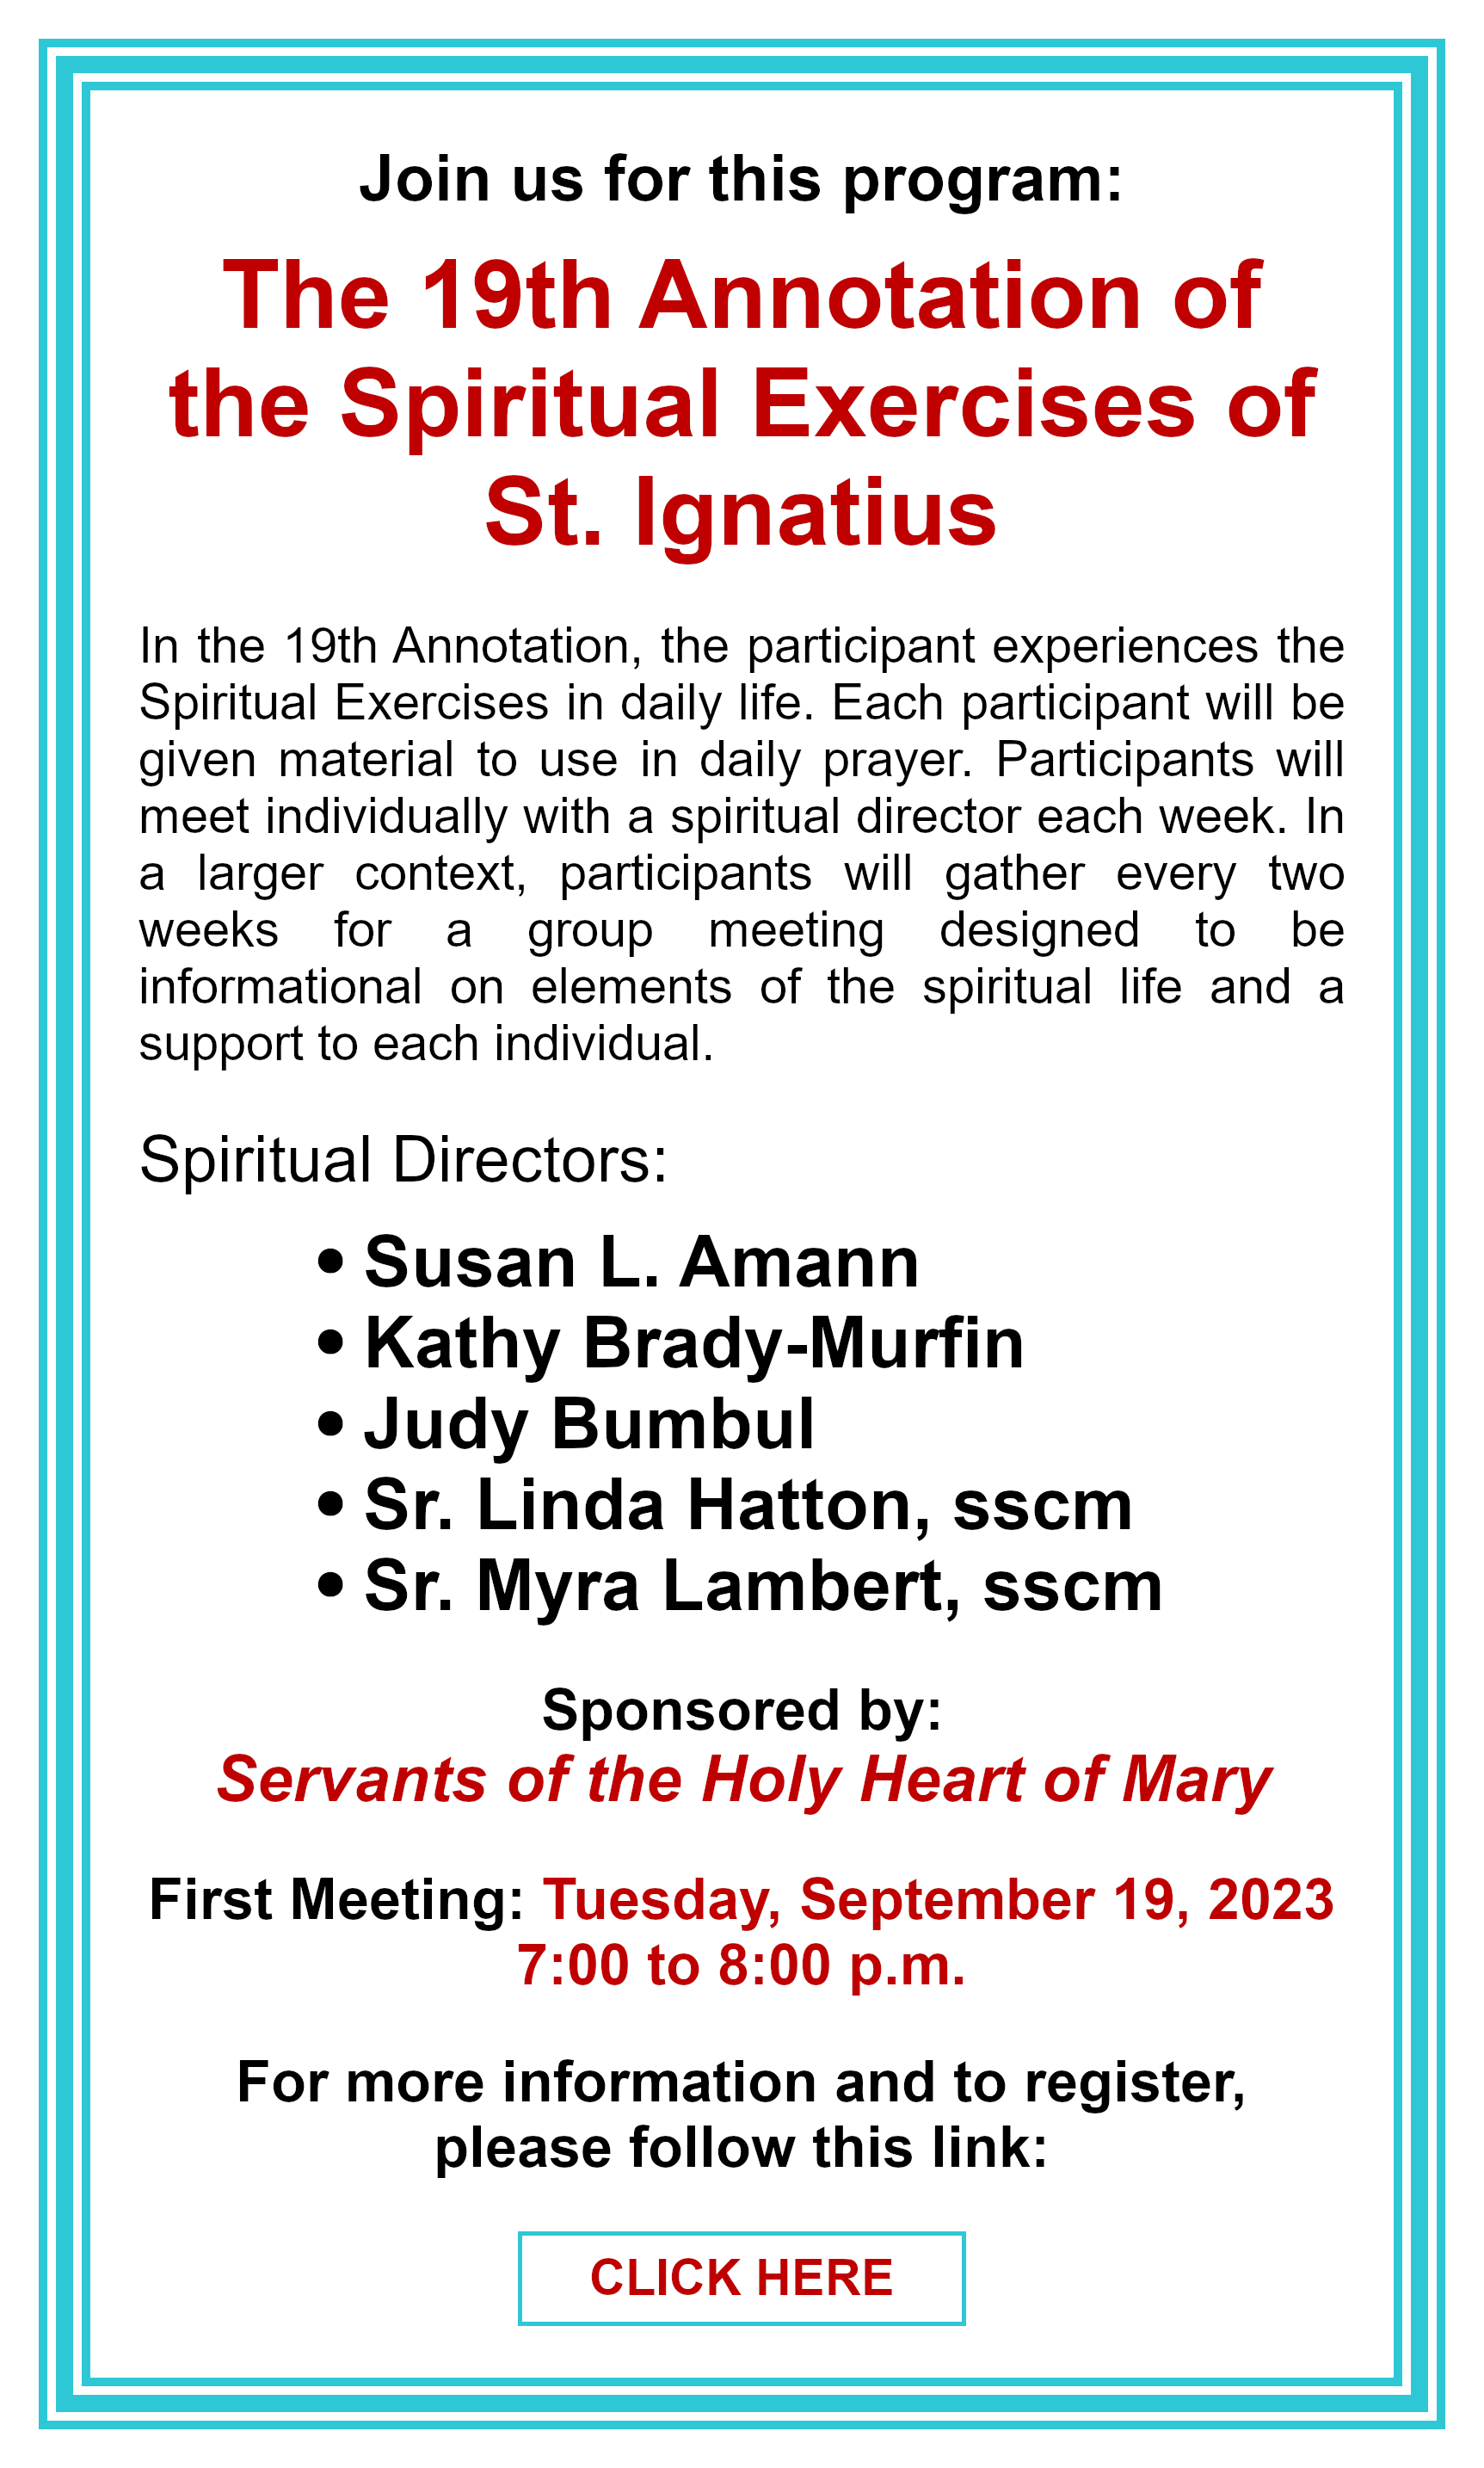 The 19th Annotation of the Spiritual Exercises of St. Ignatius: Click here for more information